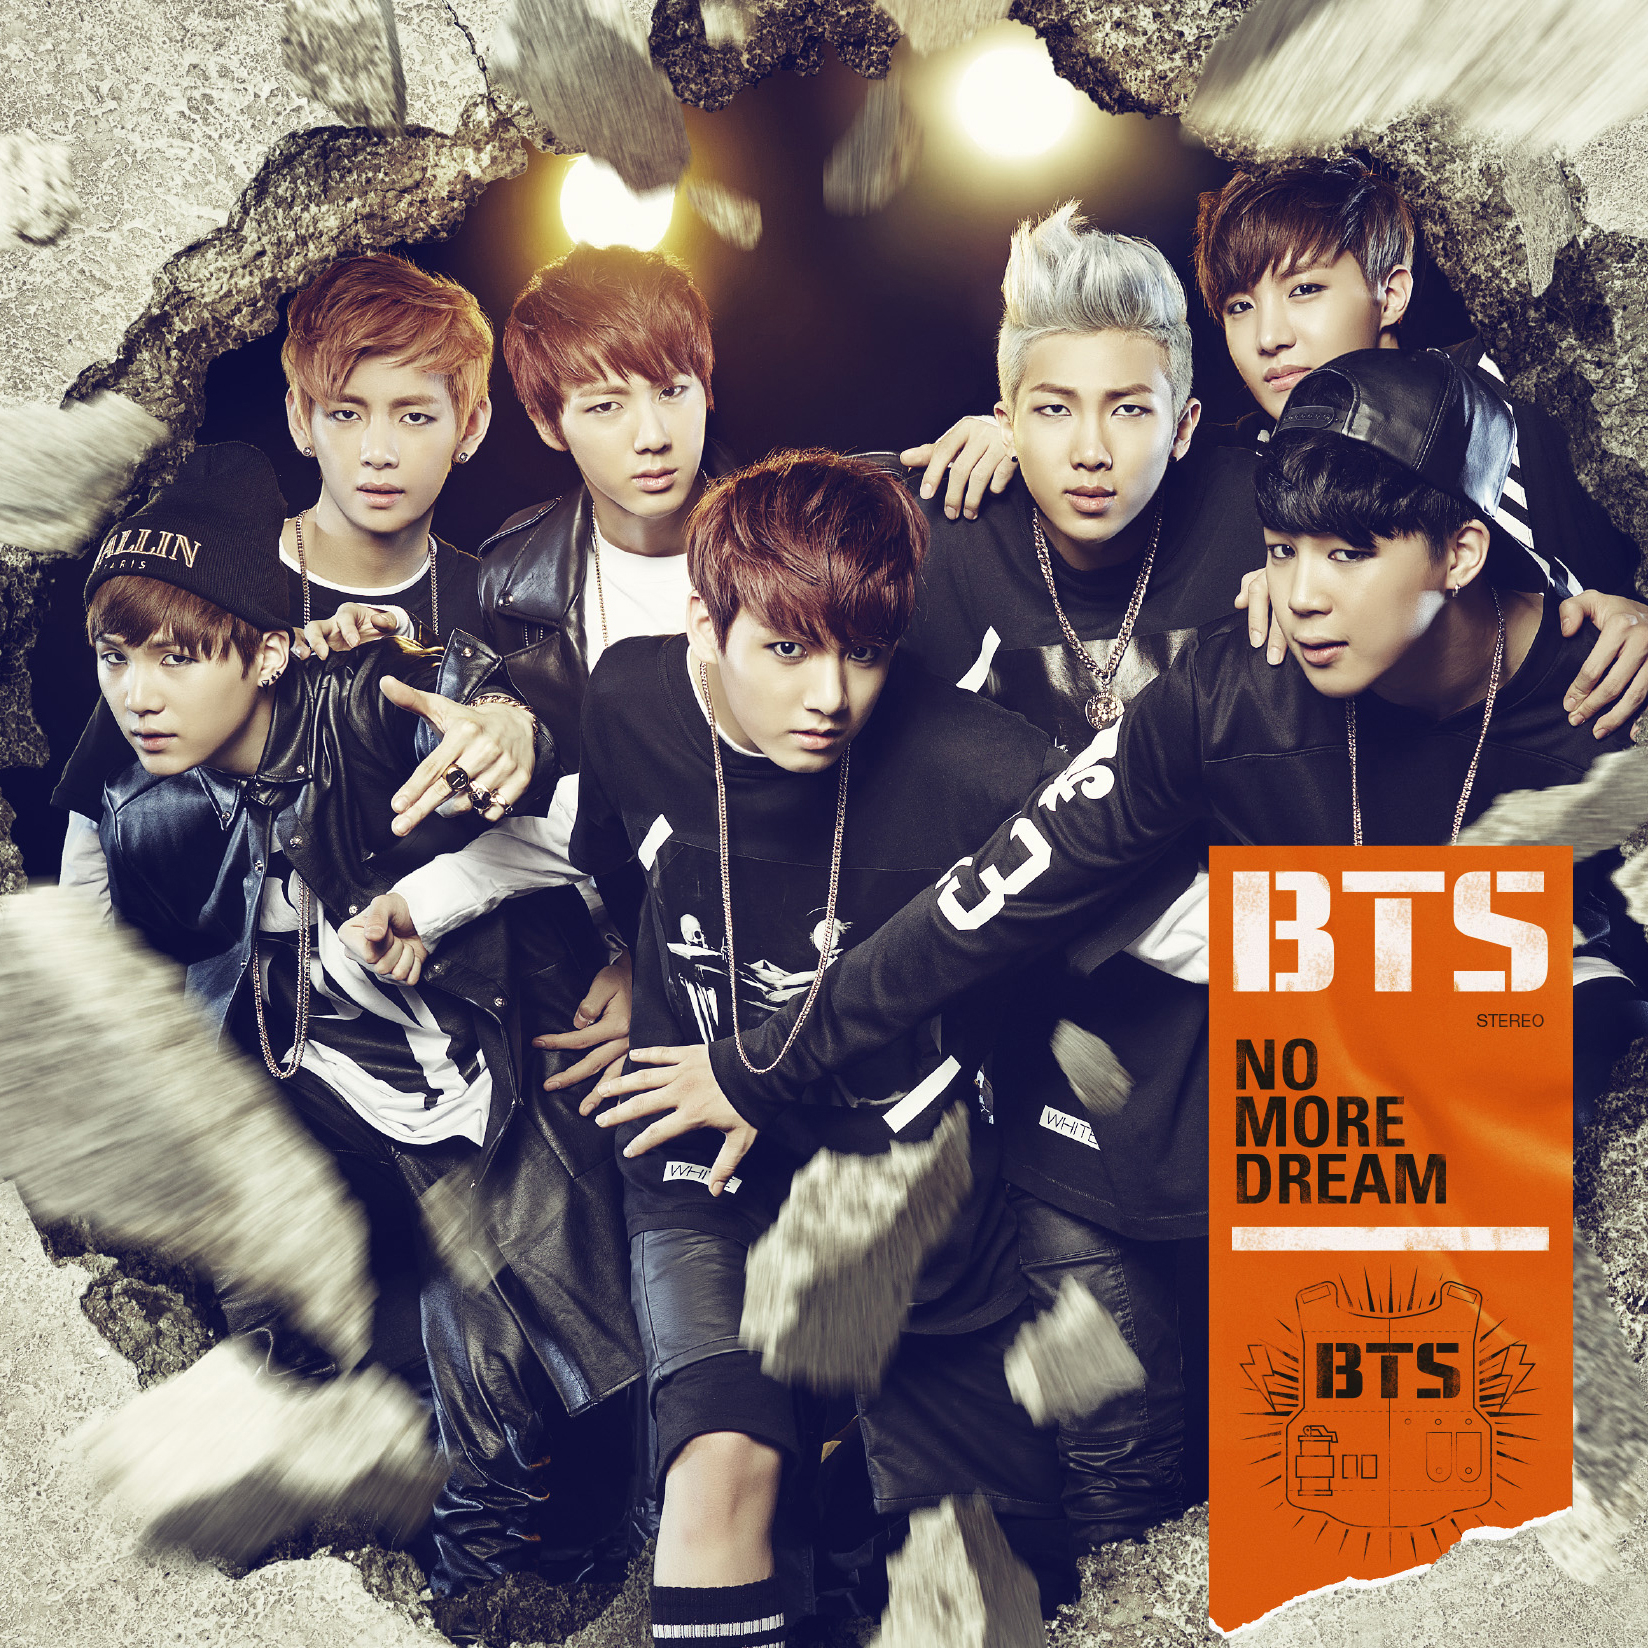 Bts Songs List 2013 To 2020 Download